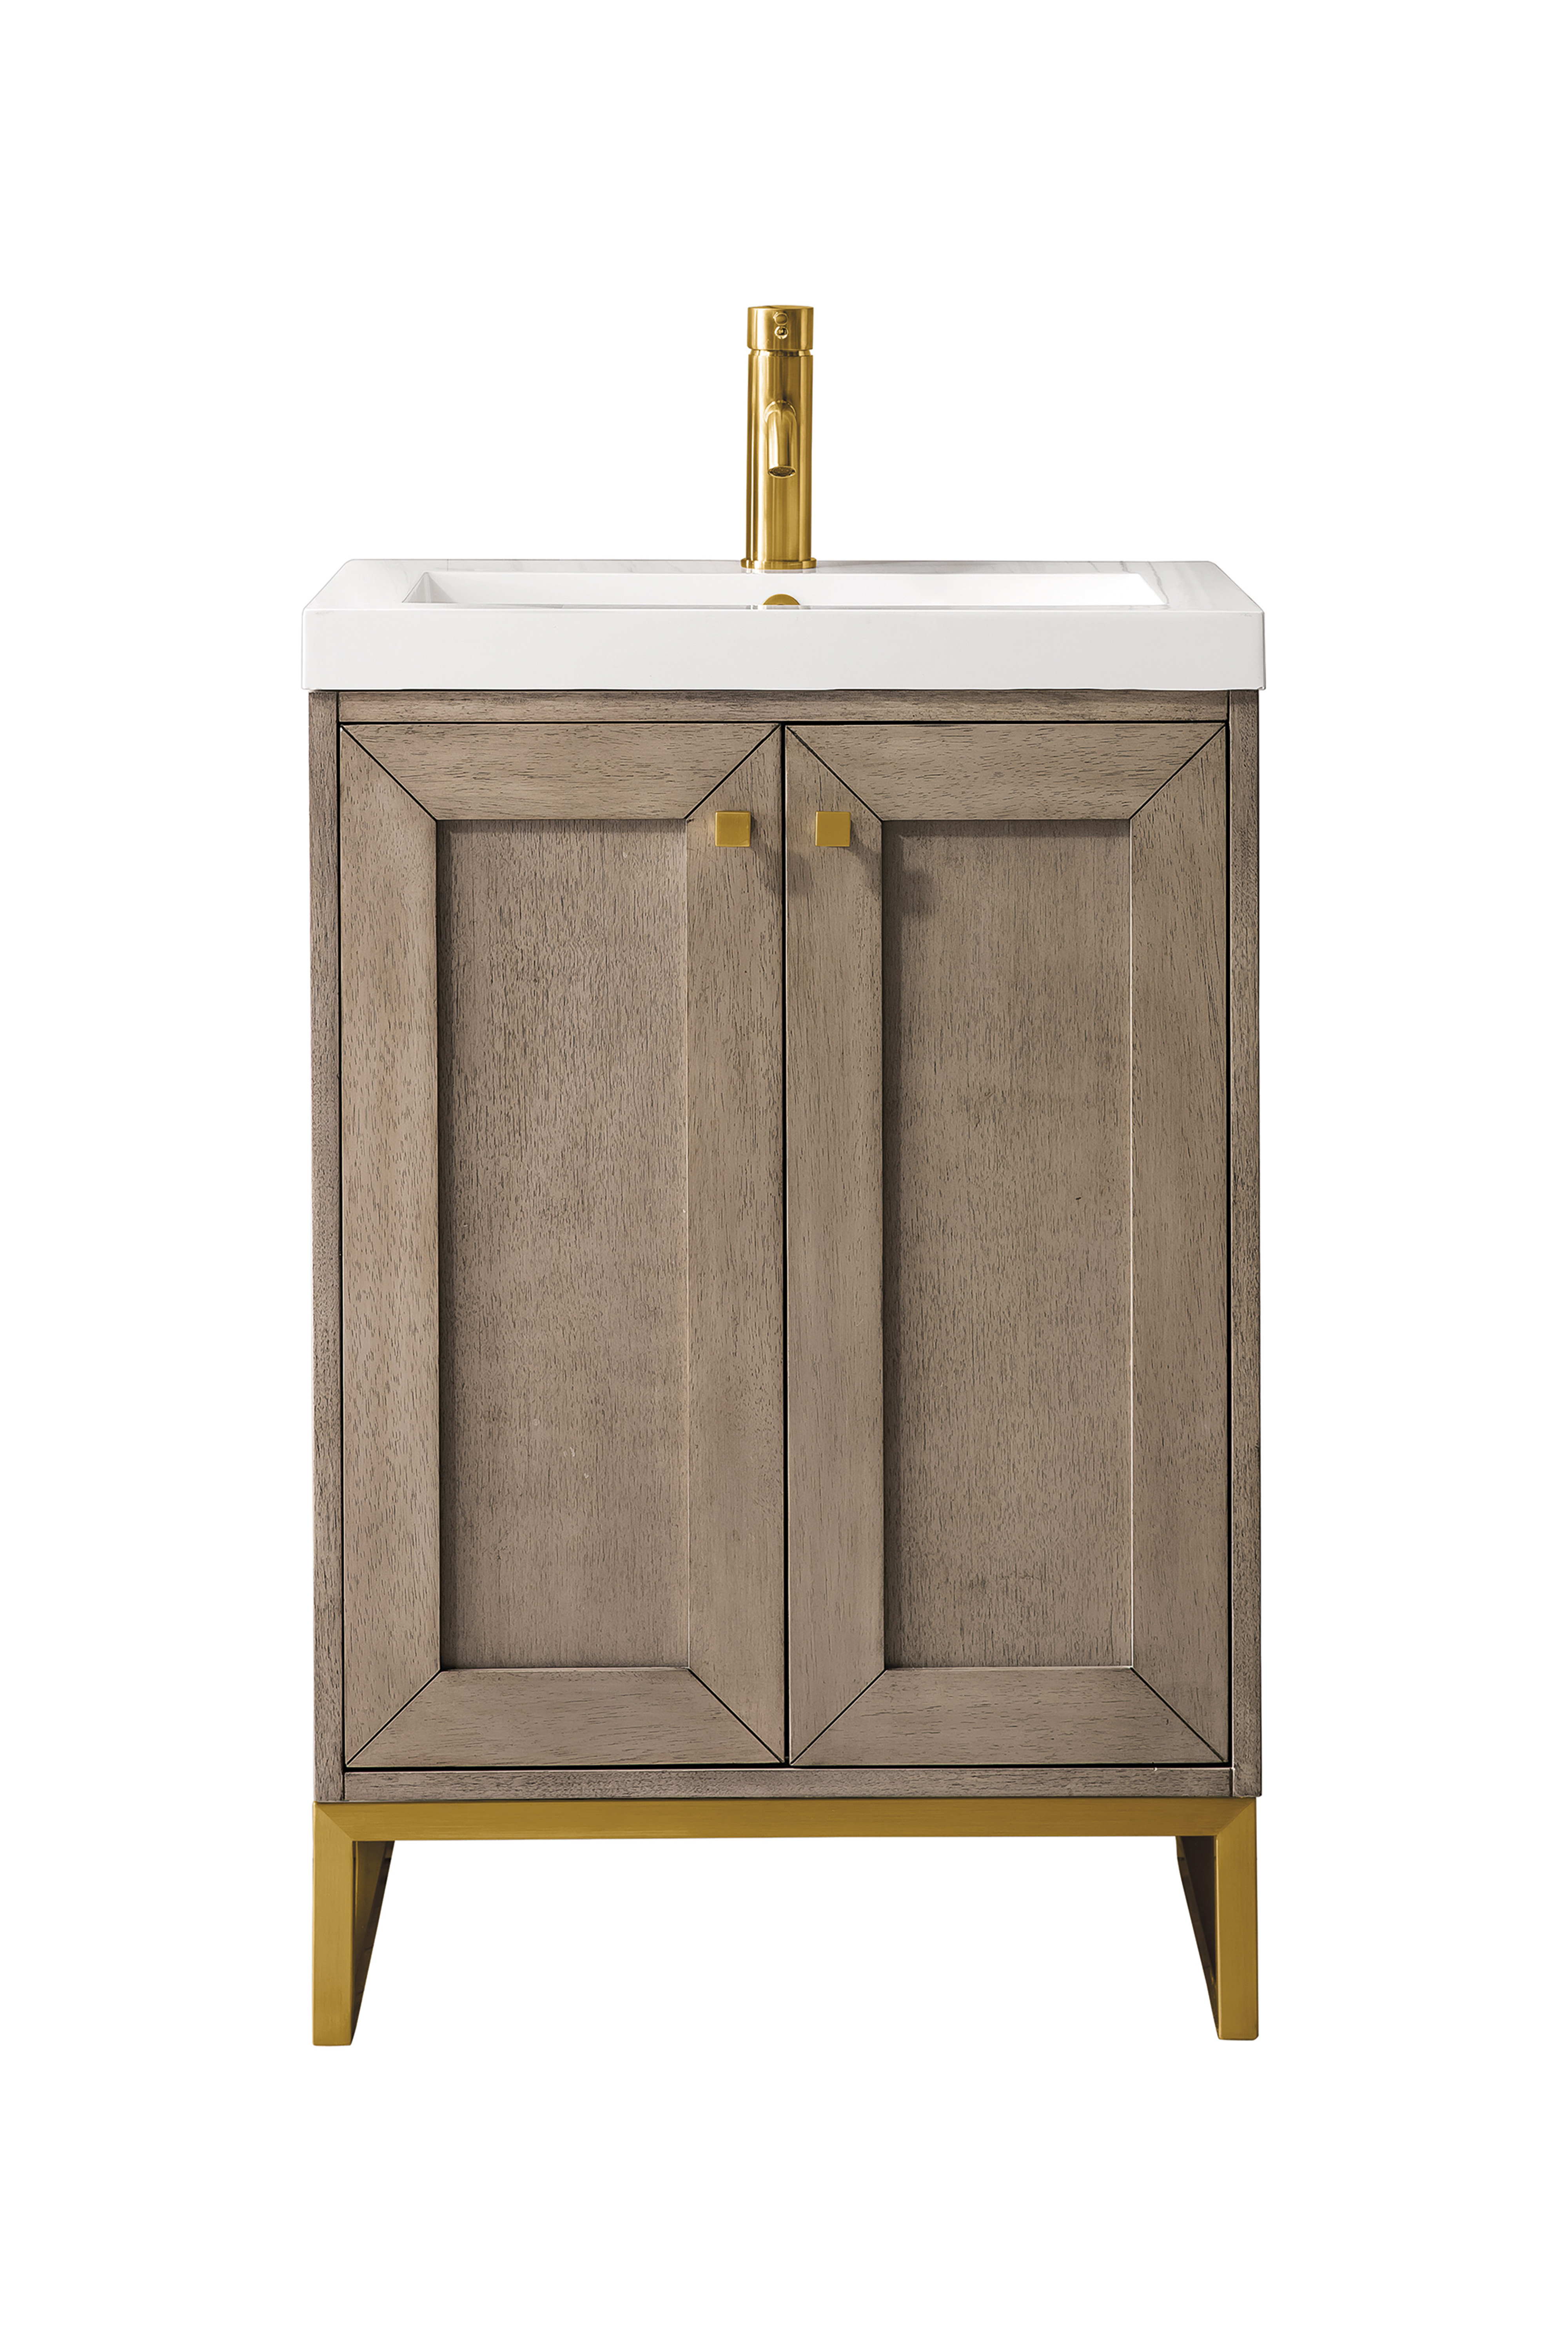 James Martin E303V20WWRGDWG Chianti 20" Single Vanity Cabinet, Whitewashed Walnut, Radiant Gold, w/ White Glossy Composite Countertop